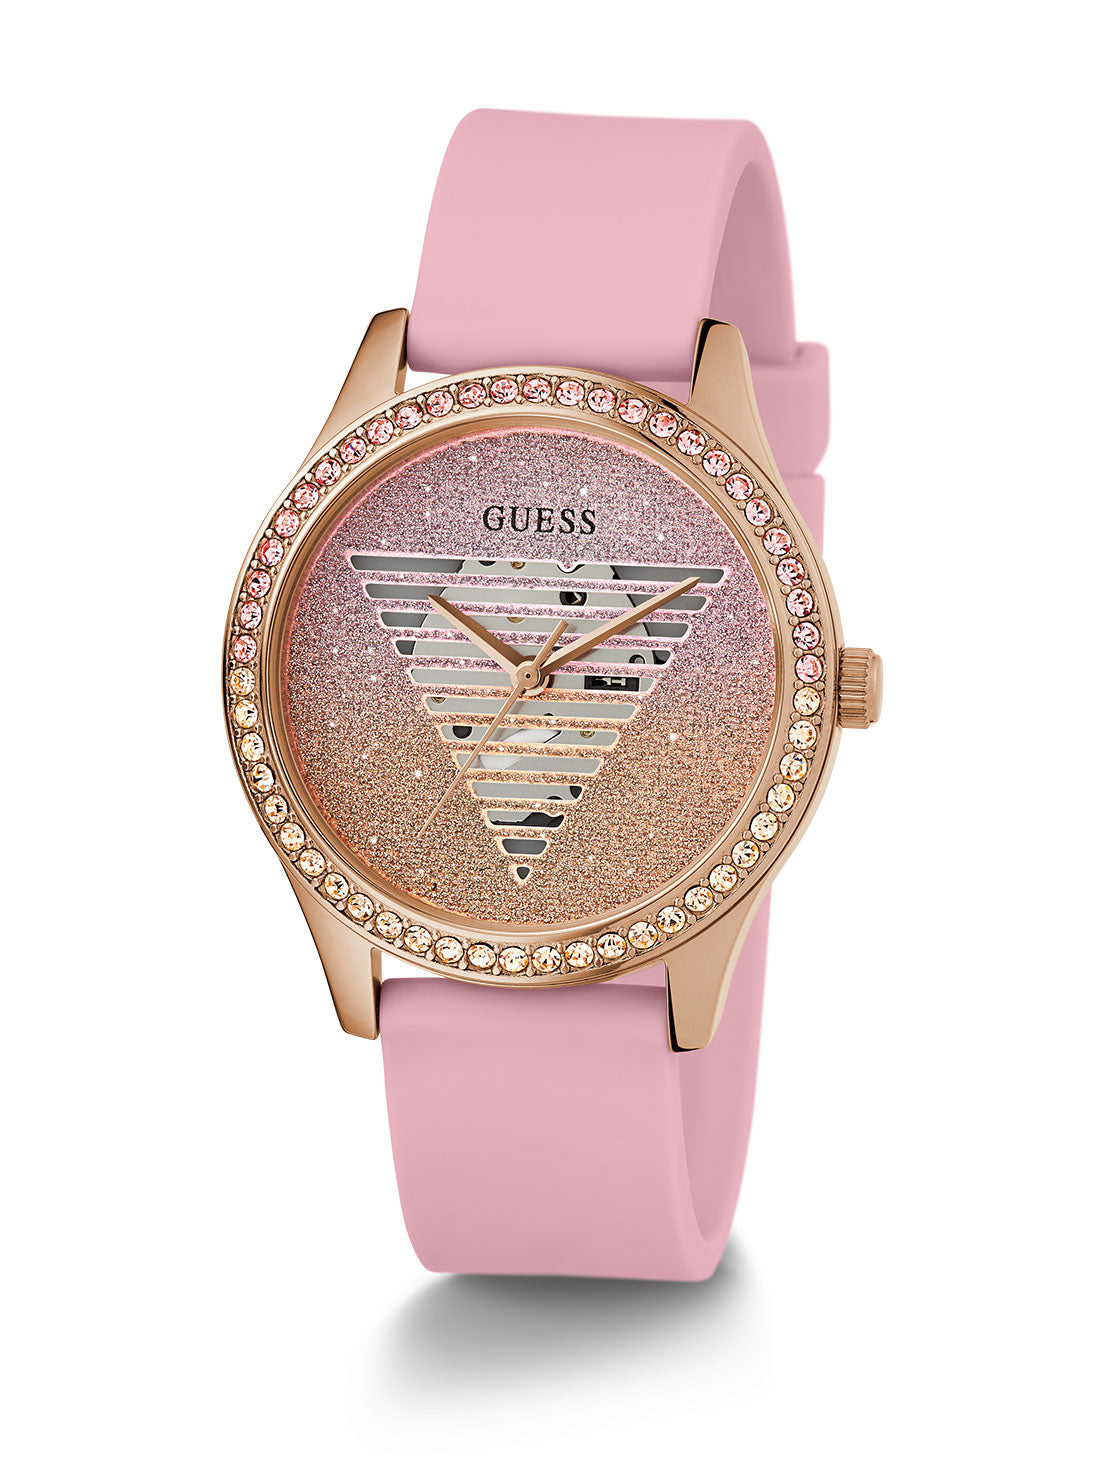 GUESS Women's Pink Lady Idol Silicone Watch GW0530L4 Full View